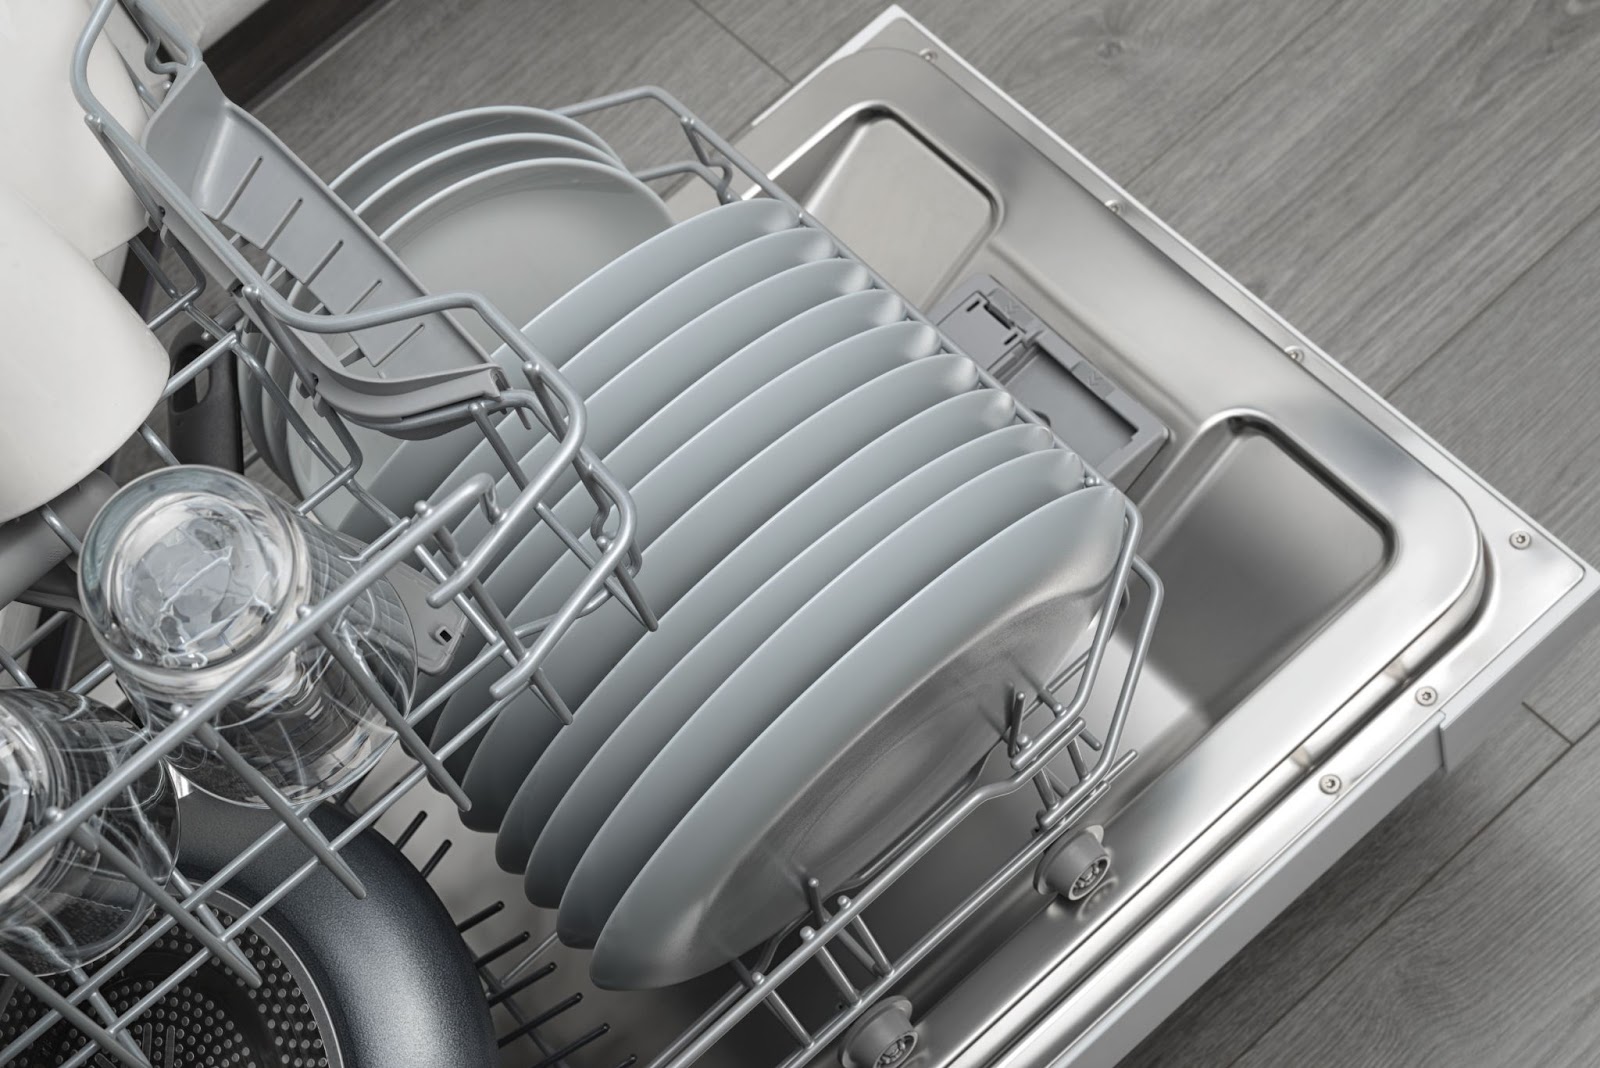 opened-domestic-dishwasher-with-cleaned-dishware